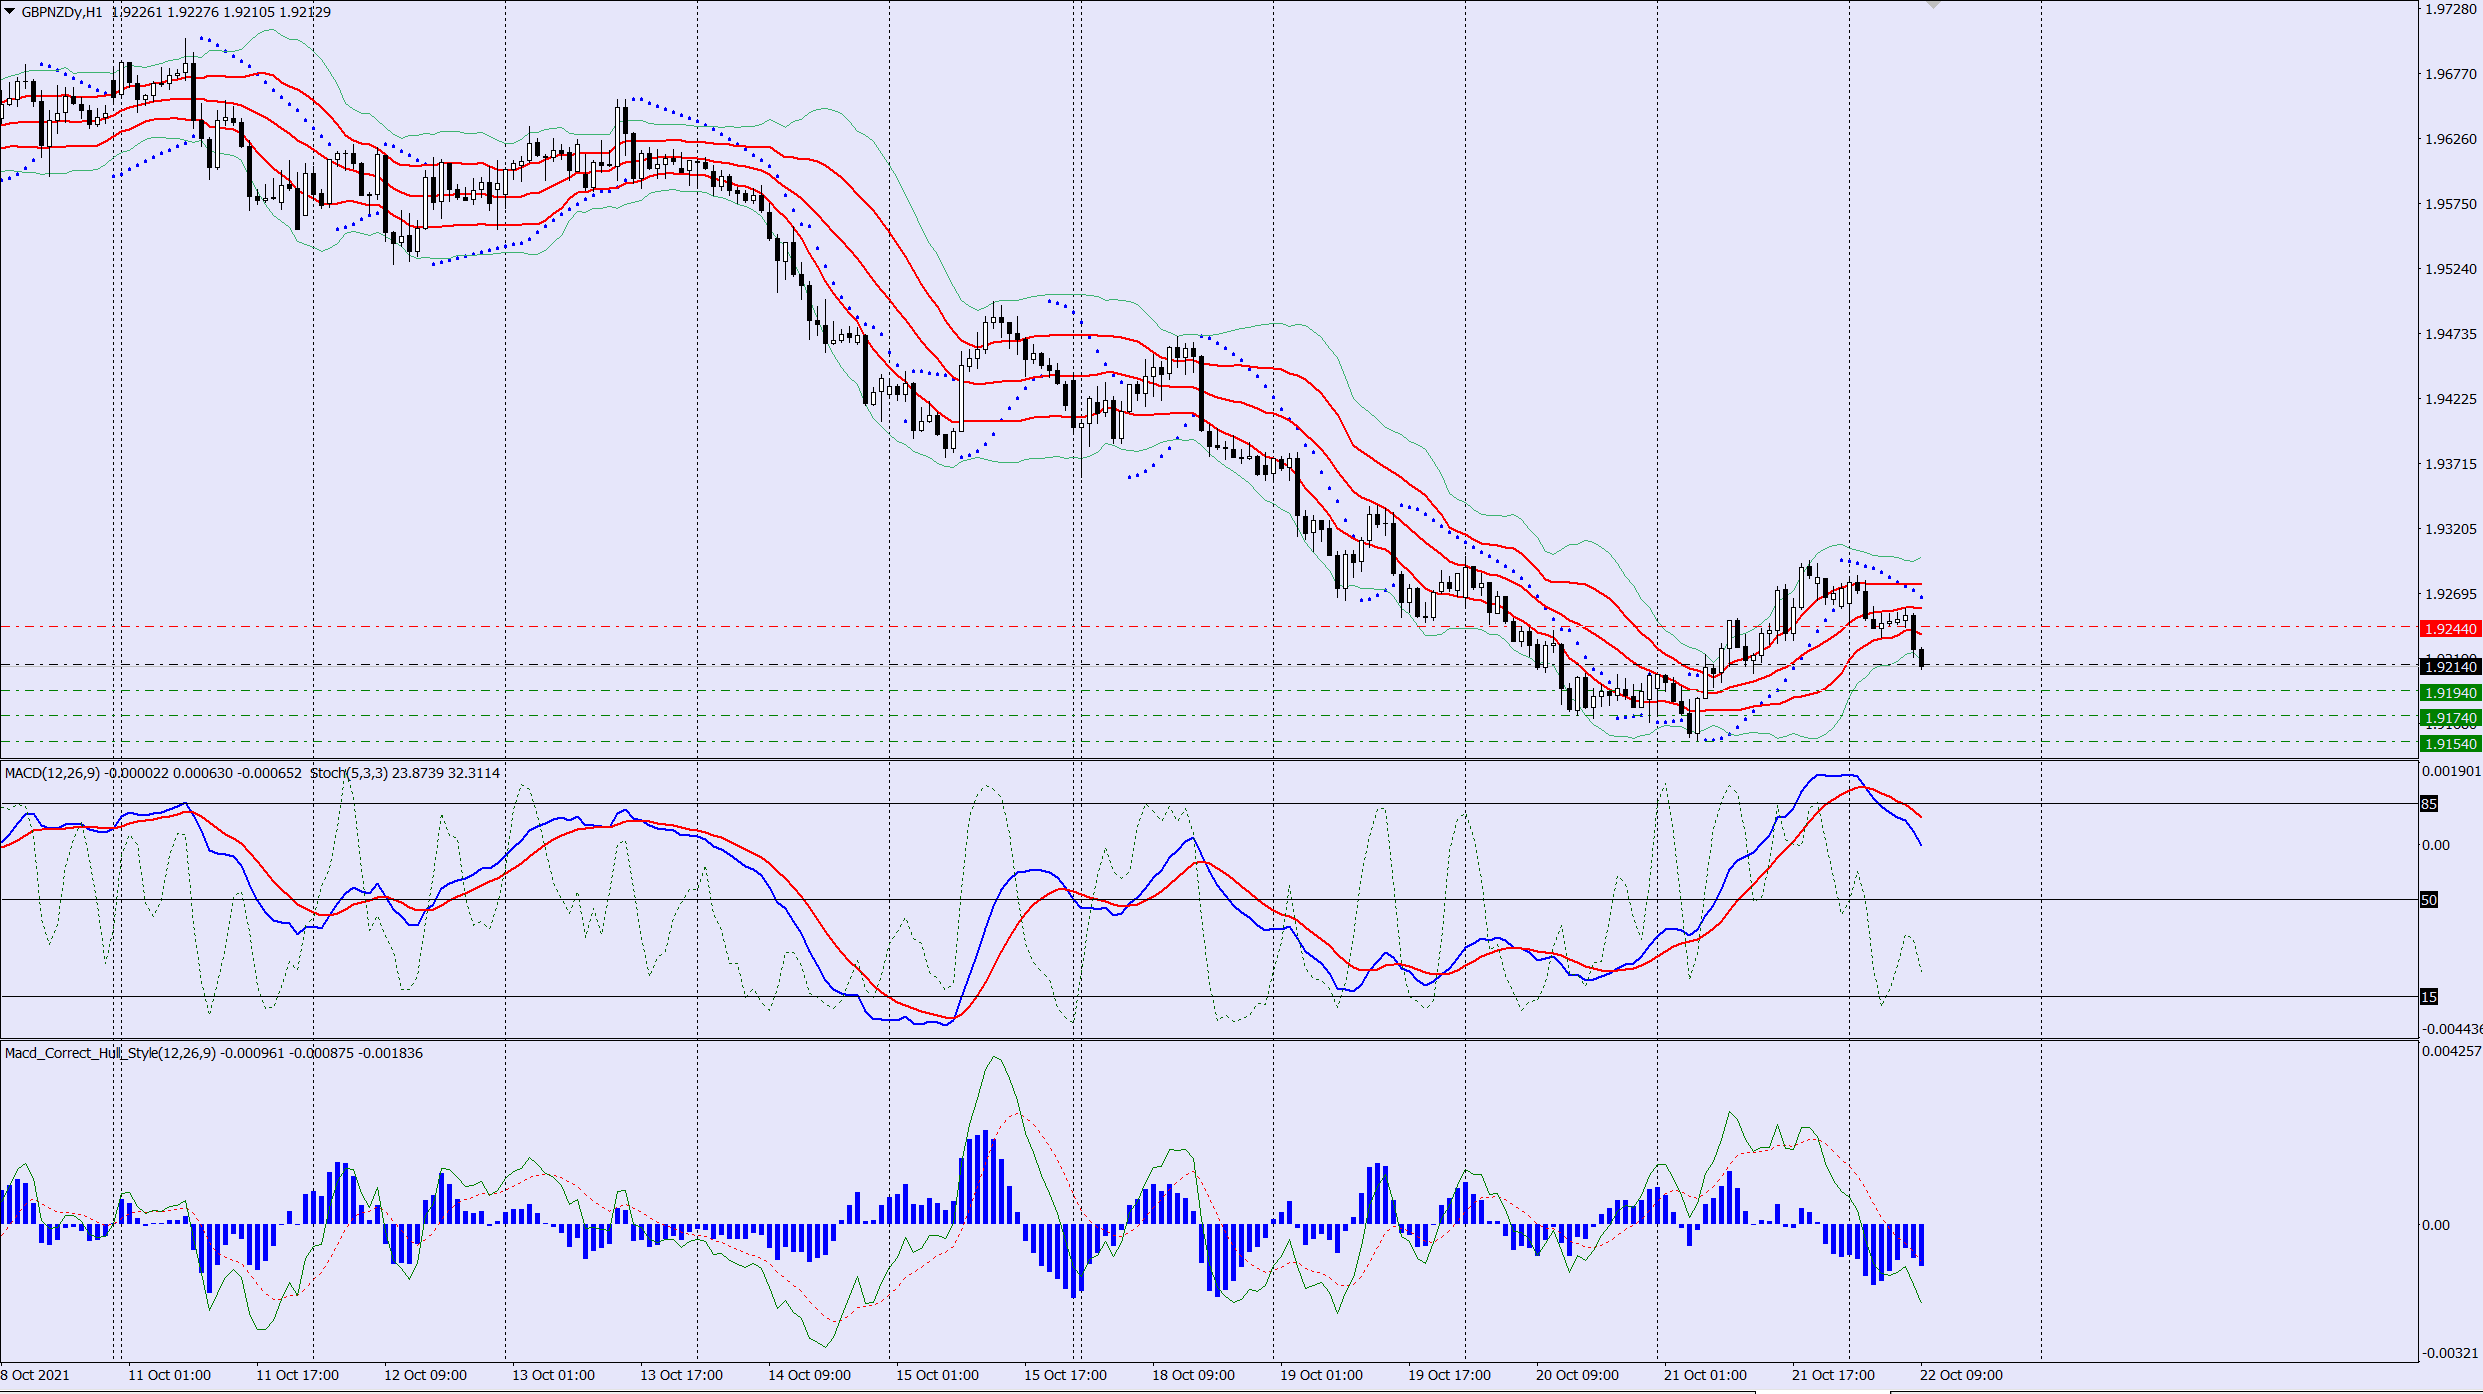 GBPNZD sell trade idea 22 10 2021